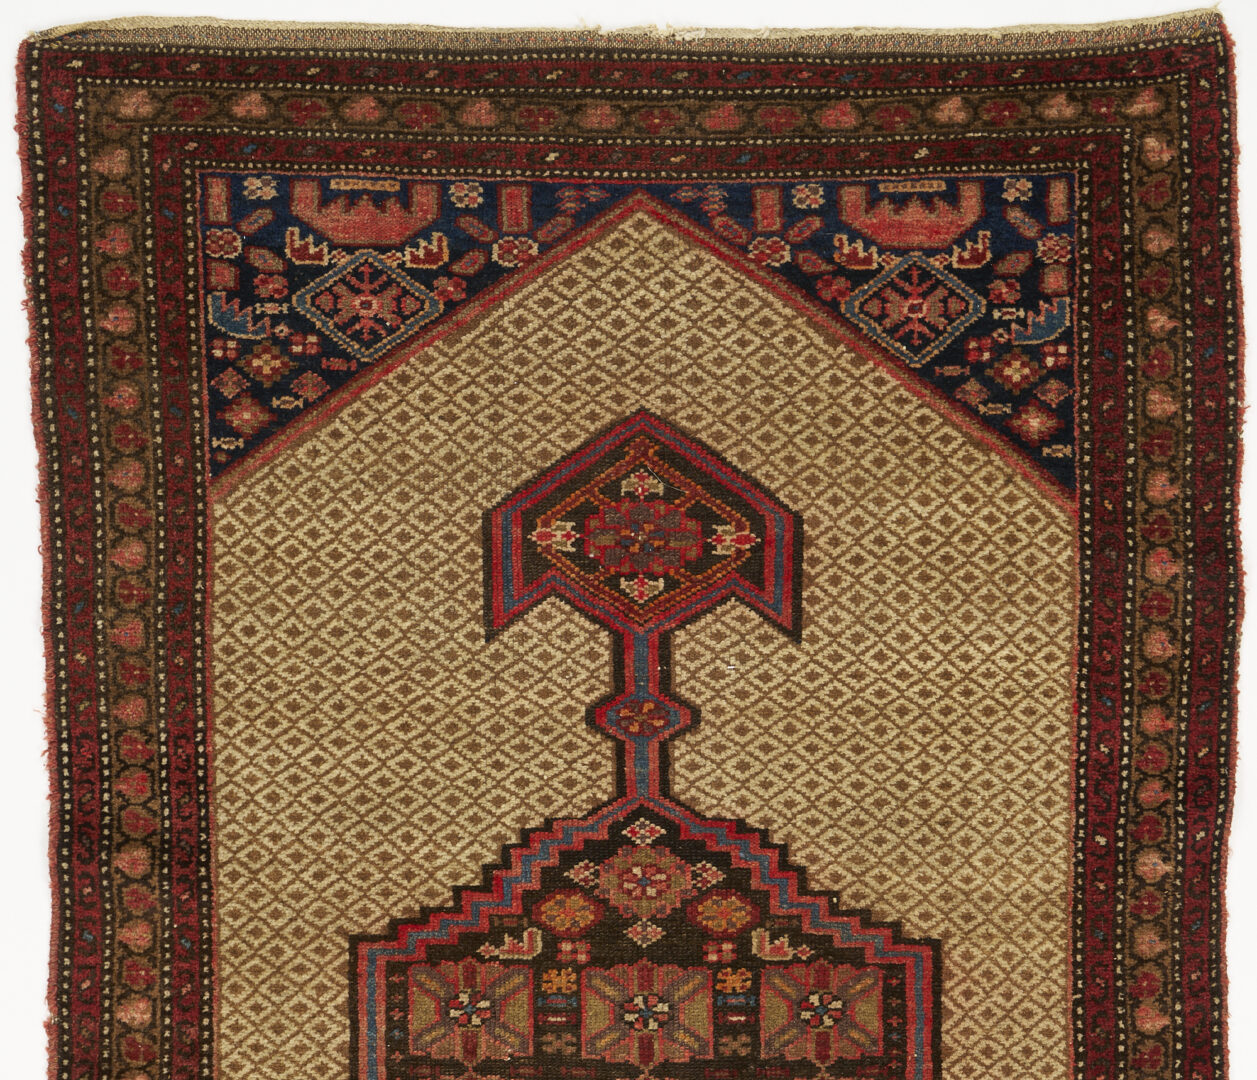 Lot 380: Two Persian / Iranian Area Rugs; Approx. 6' x 3'